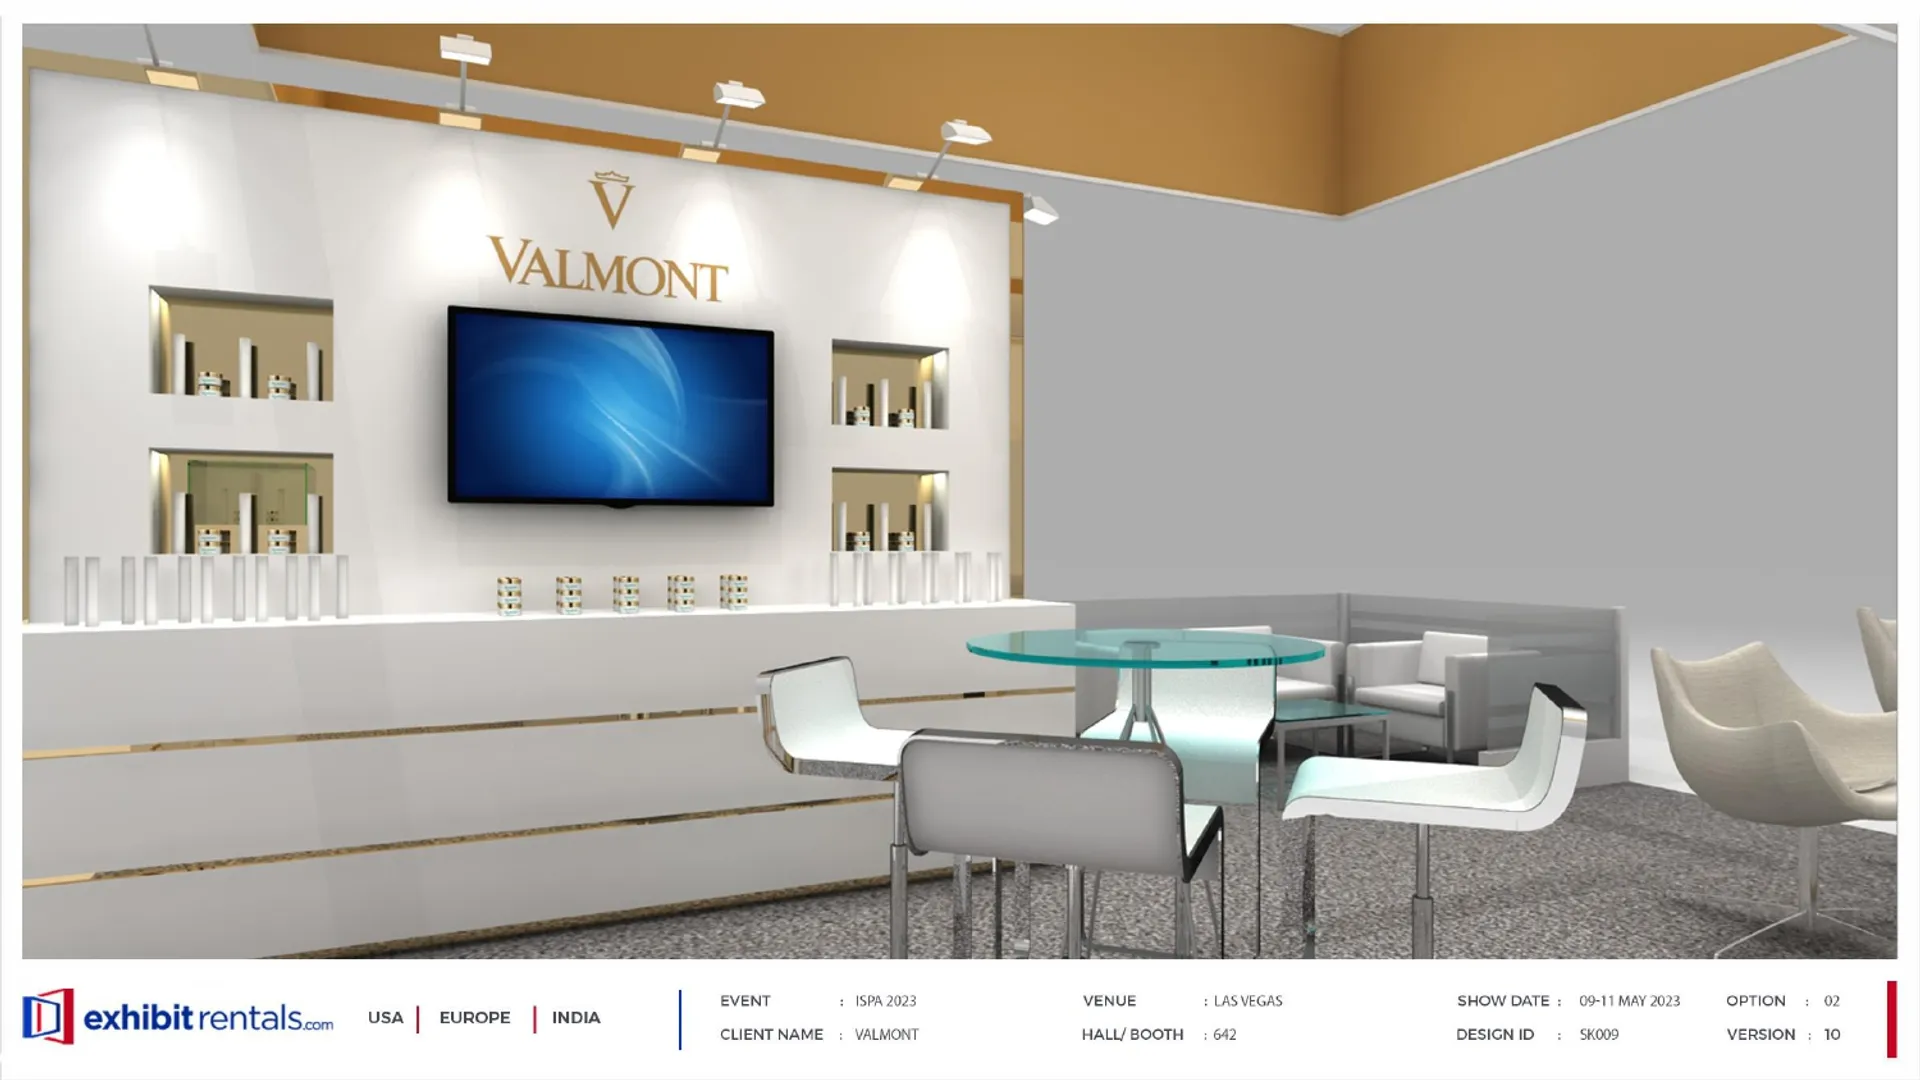 booth-design-projects/Exhibit-Rentals/2024-04-17-20x20-ISLAND-Project-109/2.10_Valmont_ISPA 2023_ER design presentation -22_page-0001-8x7ky.jpg